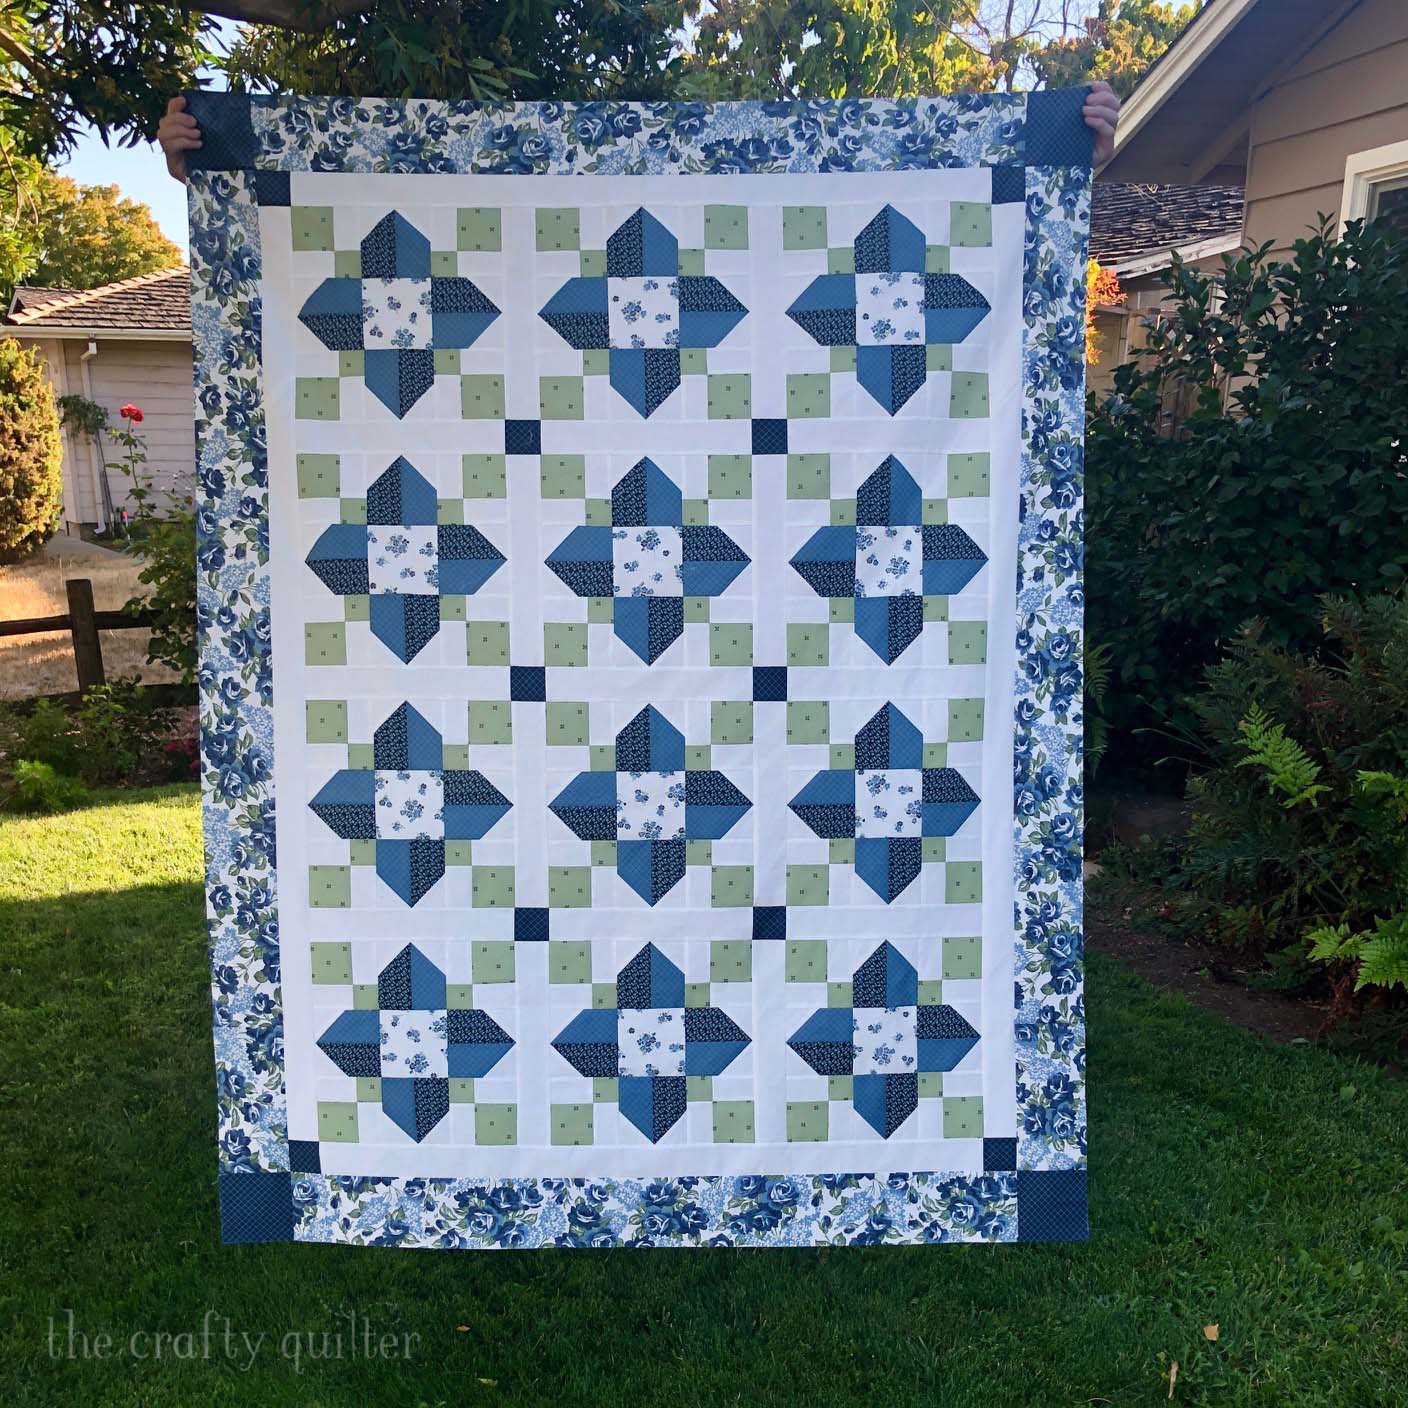 Vinca Blossom Quilt designed and made by Julie Cefalu @ the Crafty Quilter.  This is one of my favorite finished quilt tops this year!